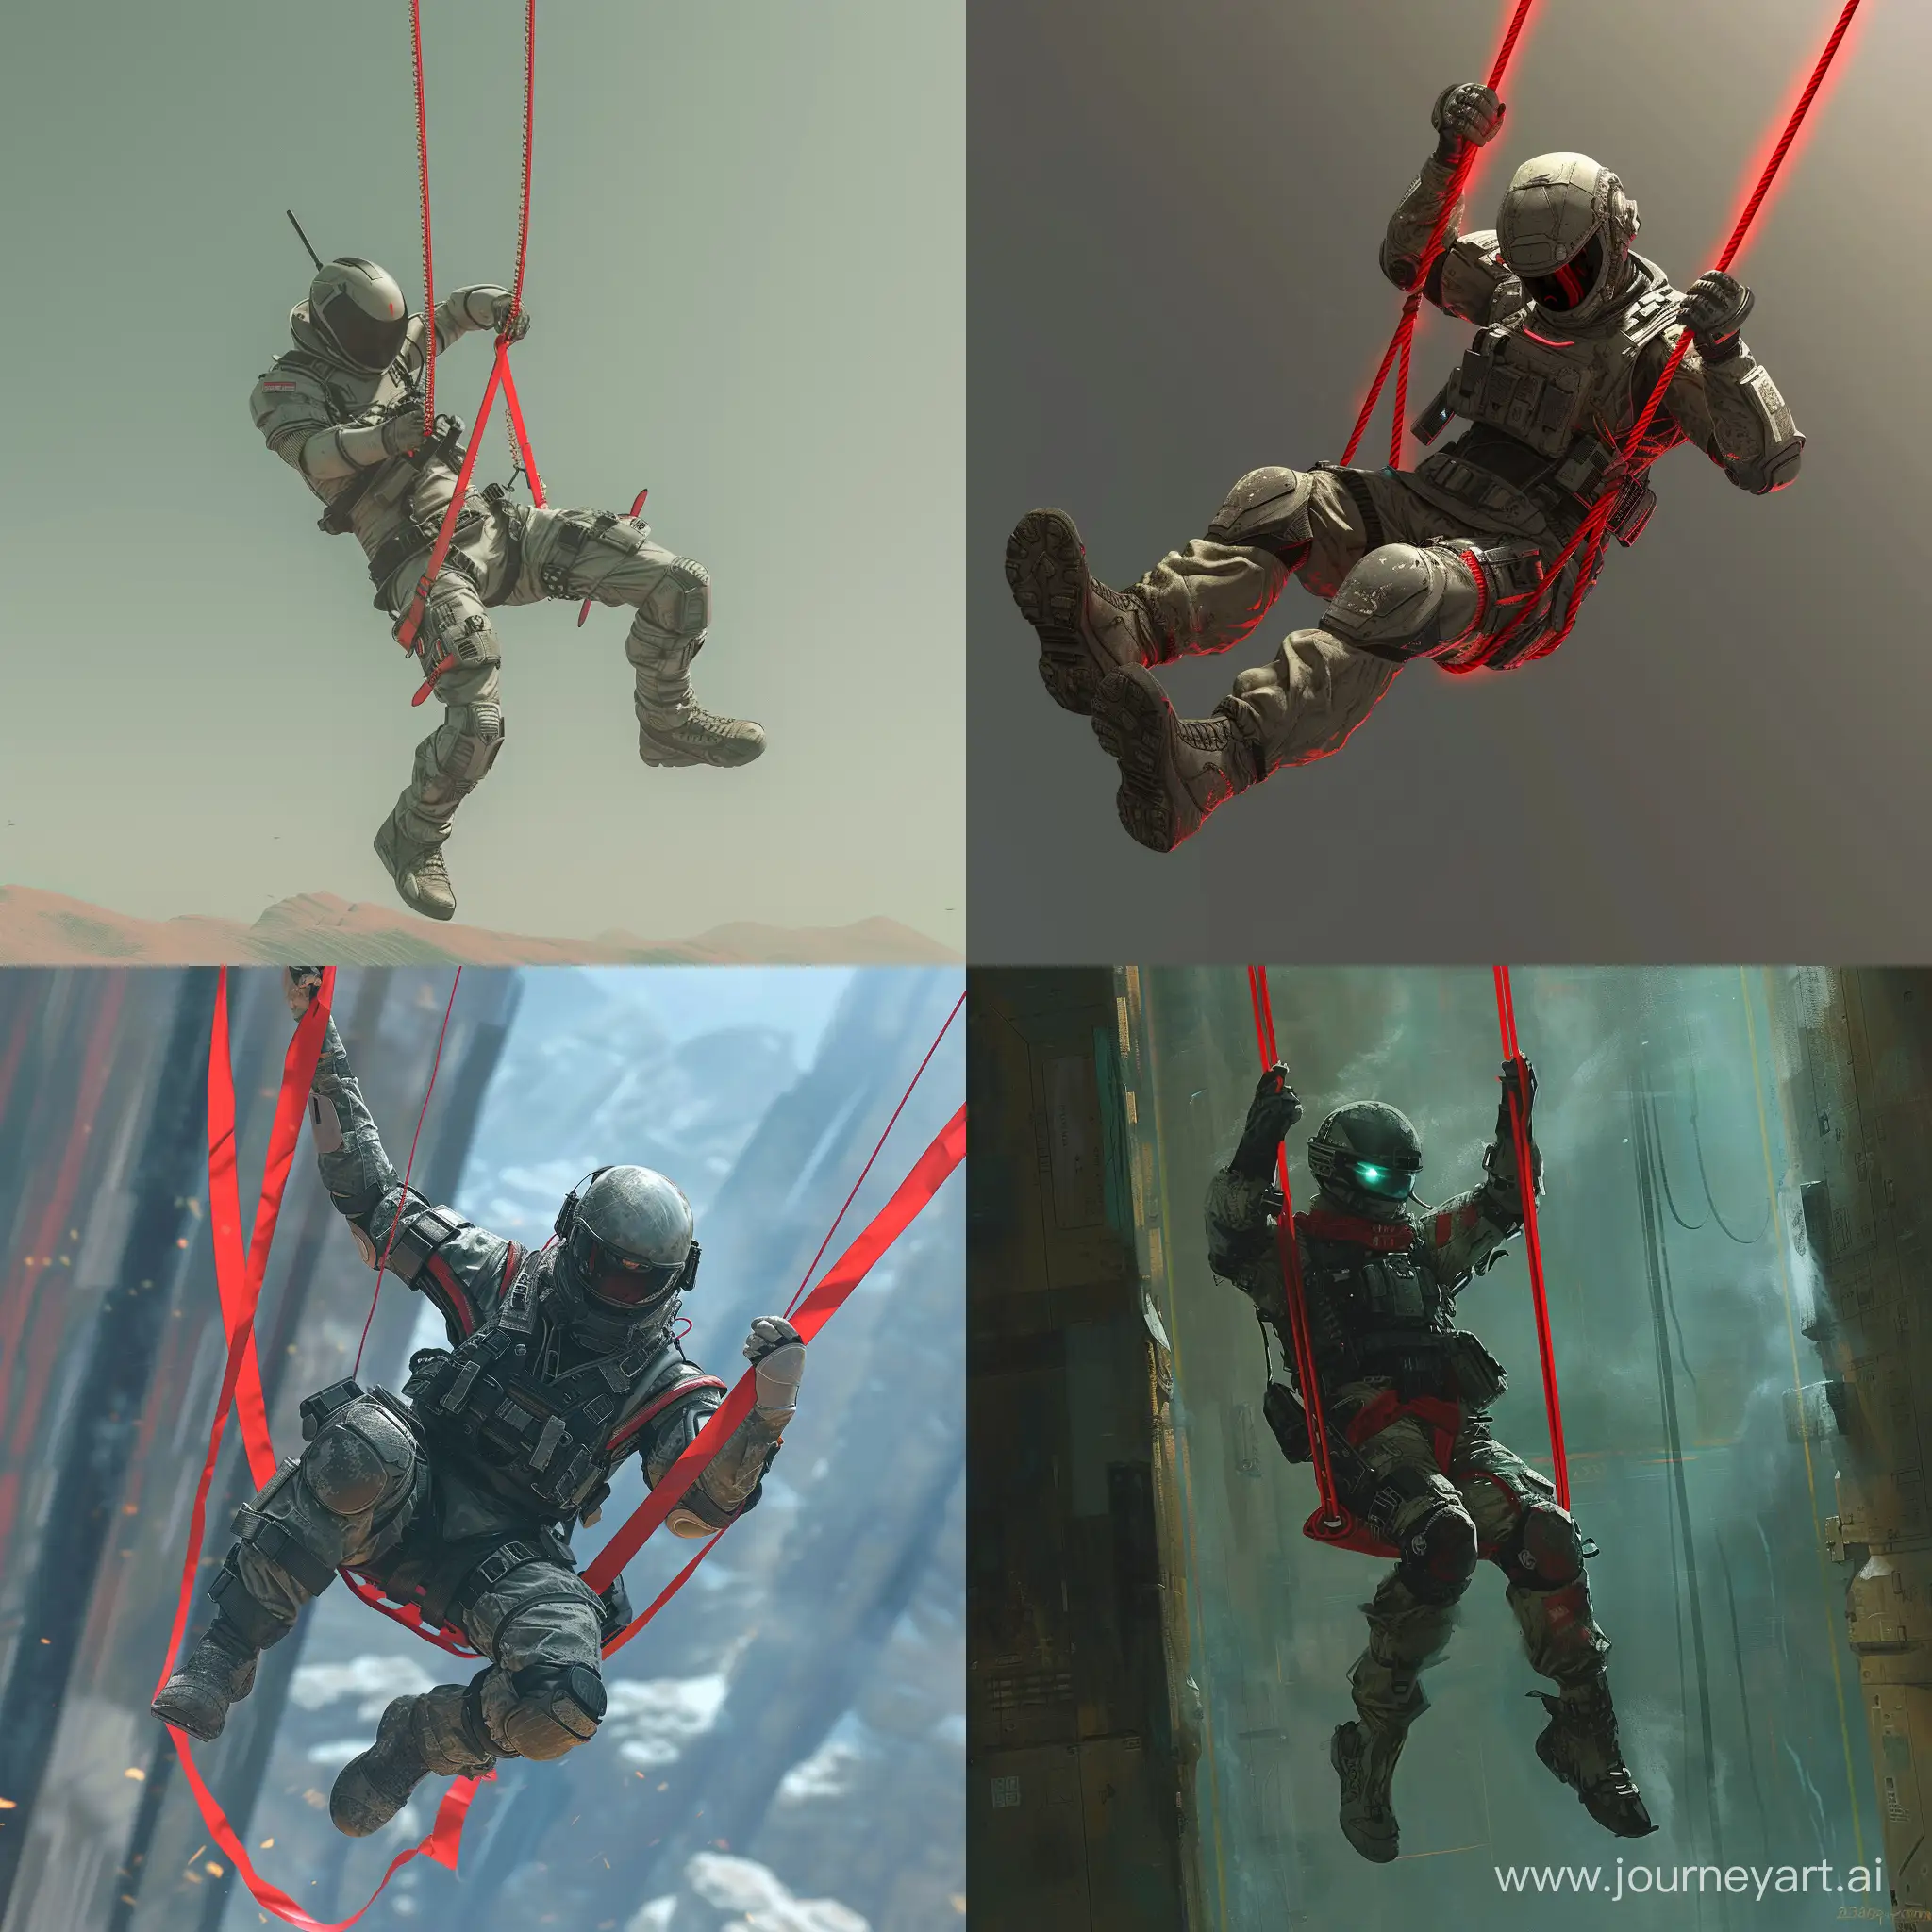 Futuristic-Soldier-Performs-Aerial-Acrobatics-on-Red-Swing